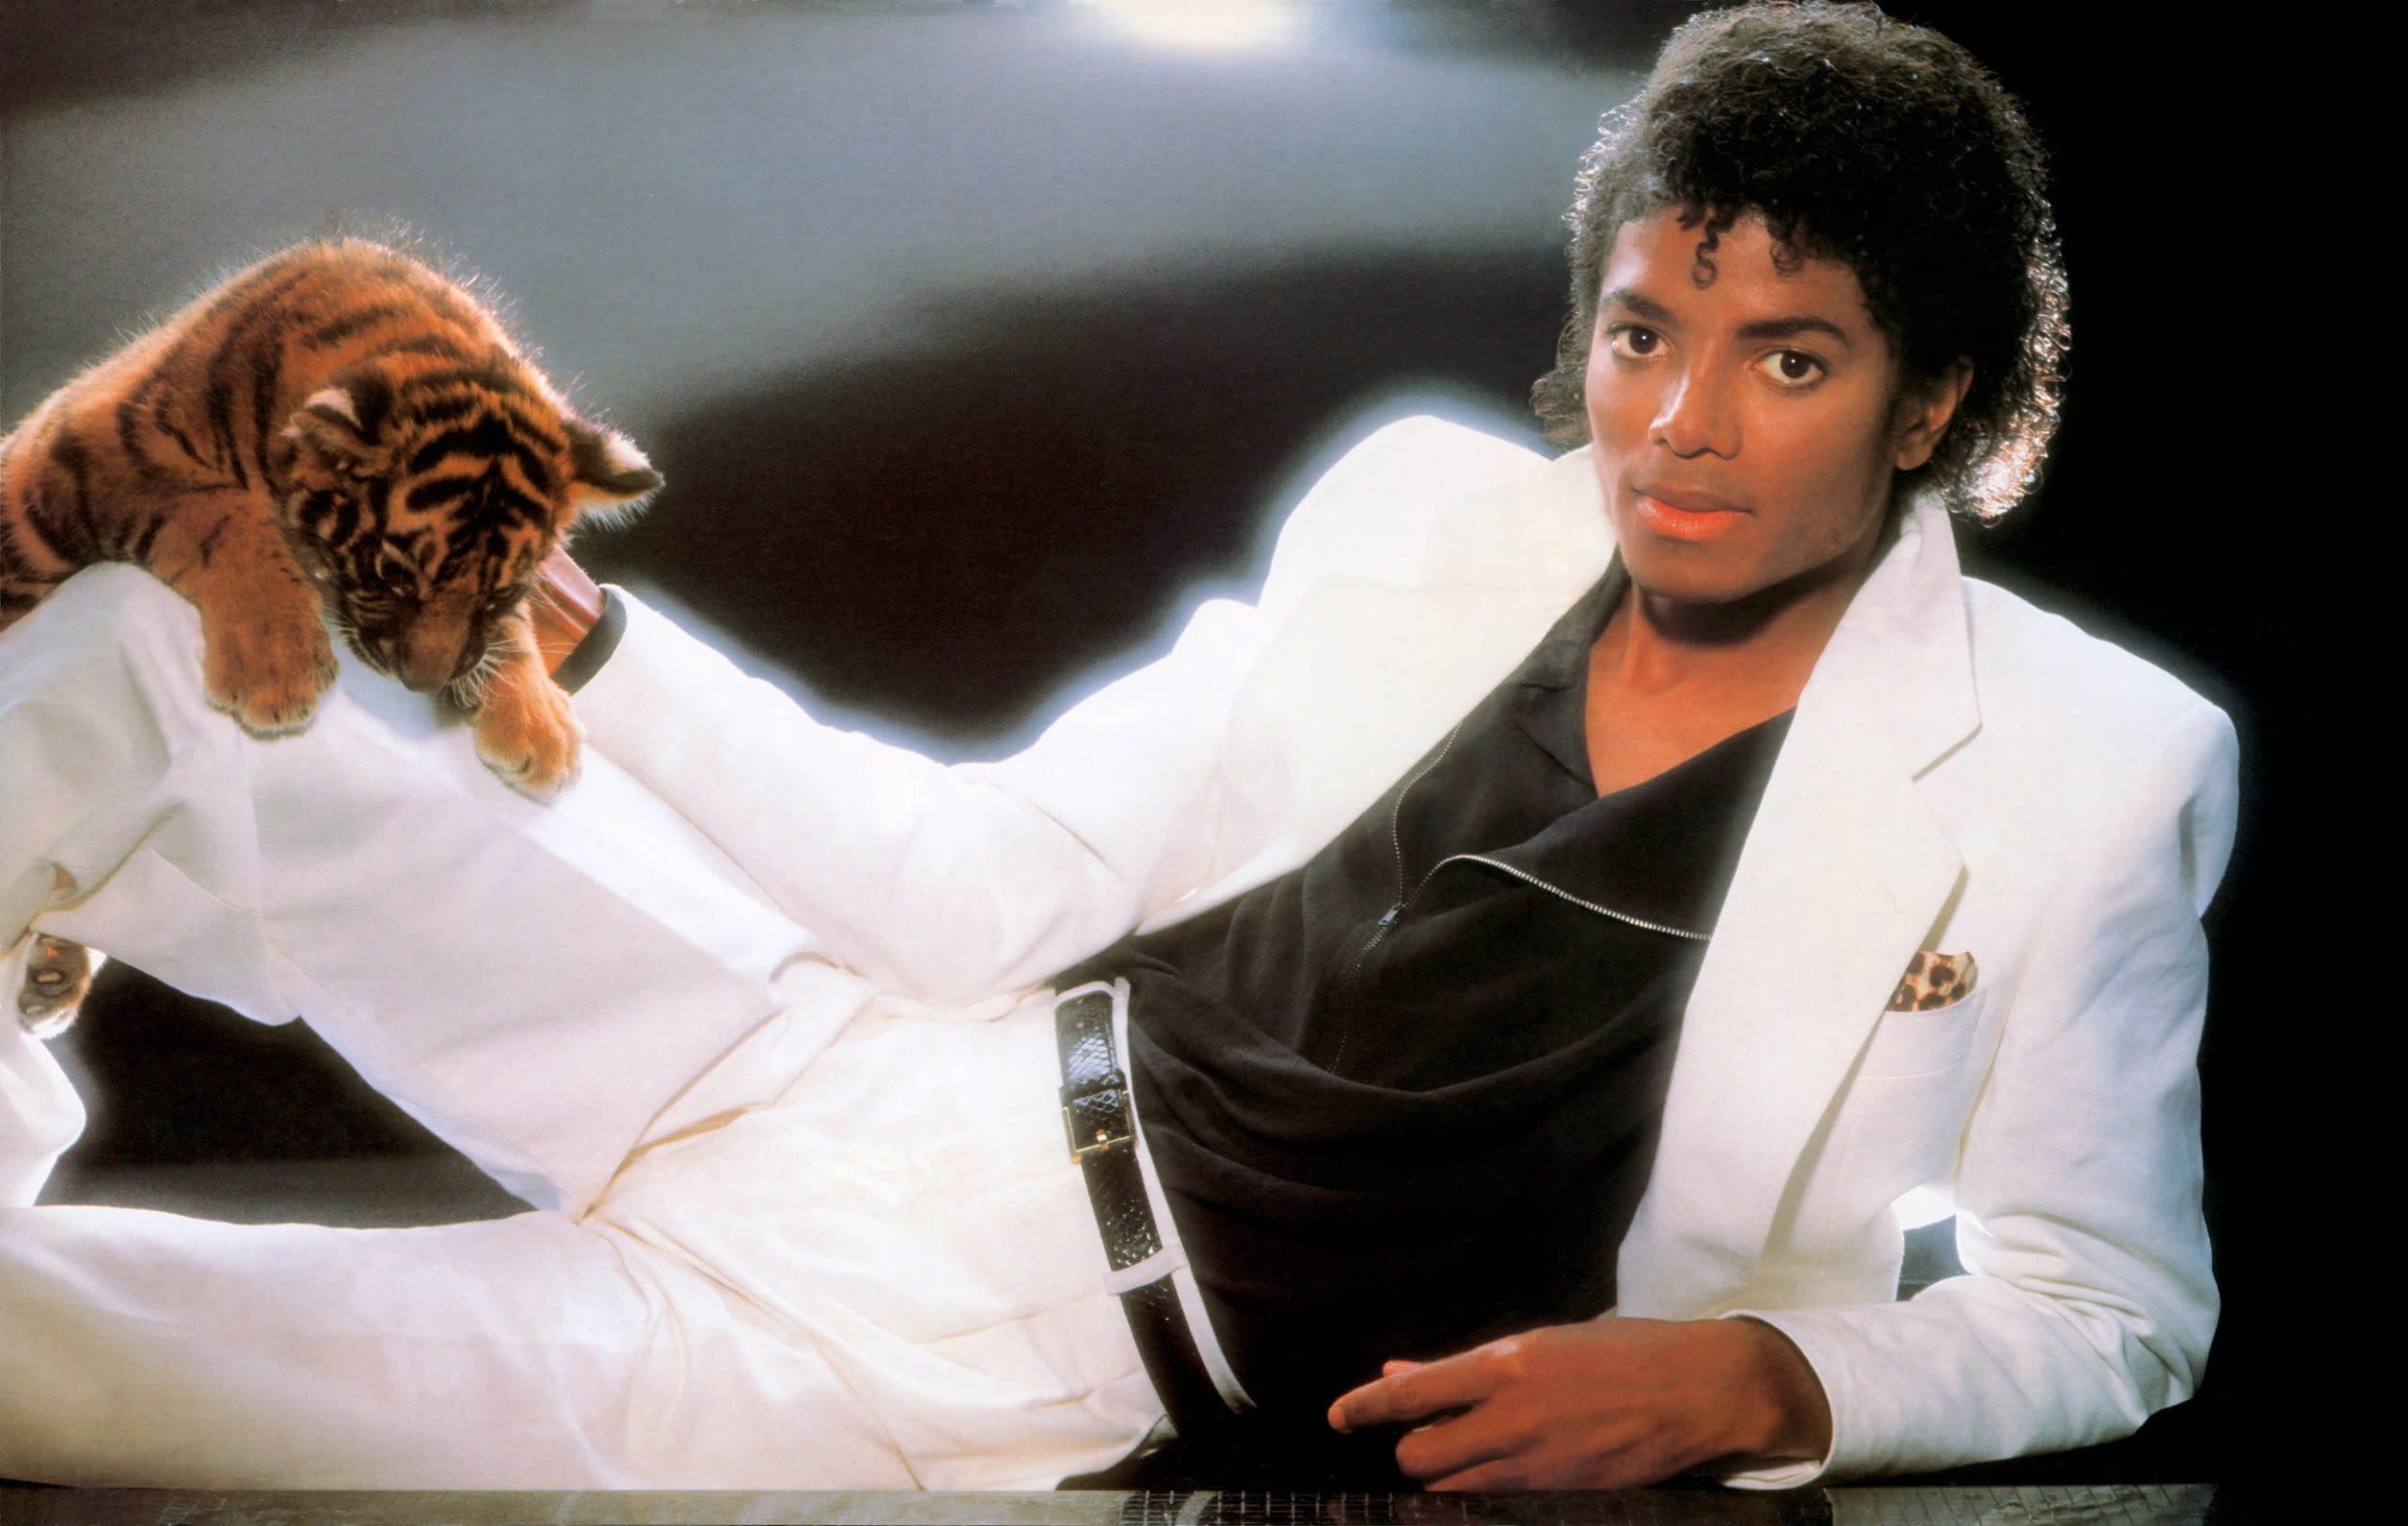 Sony’s $600m Michael Jackson deal isn’t completed yet – but it just took a big step forward in court - Music Business Worldwide